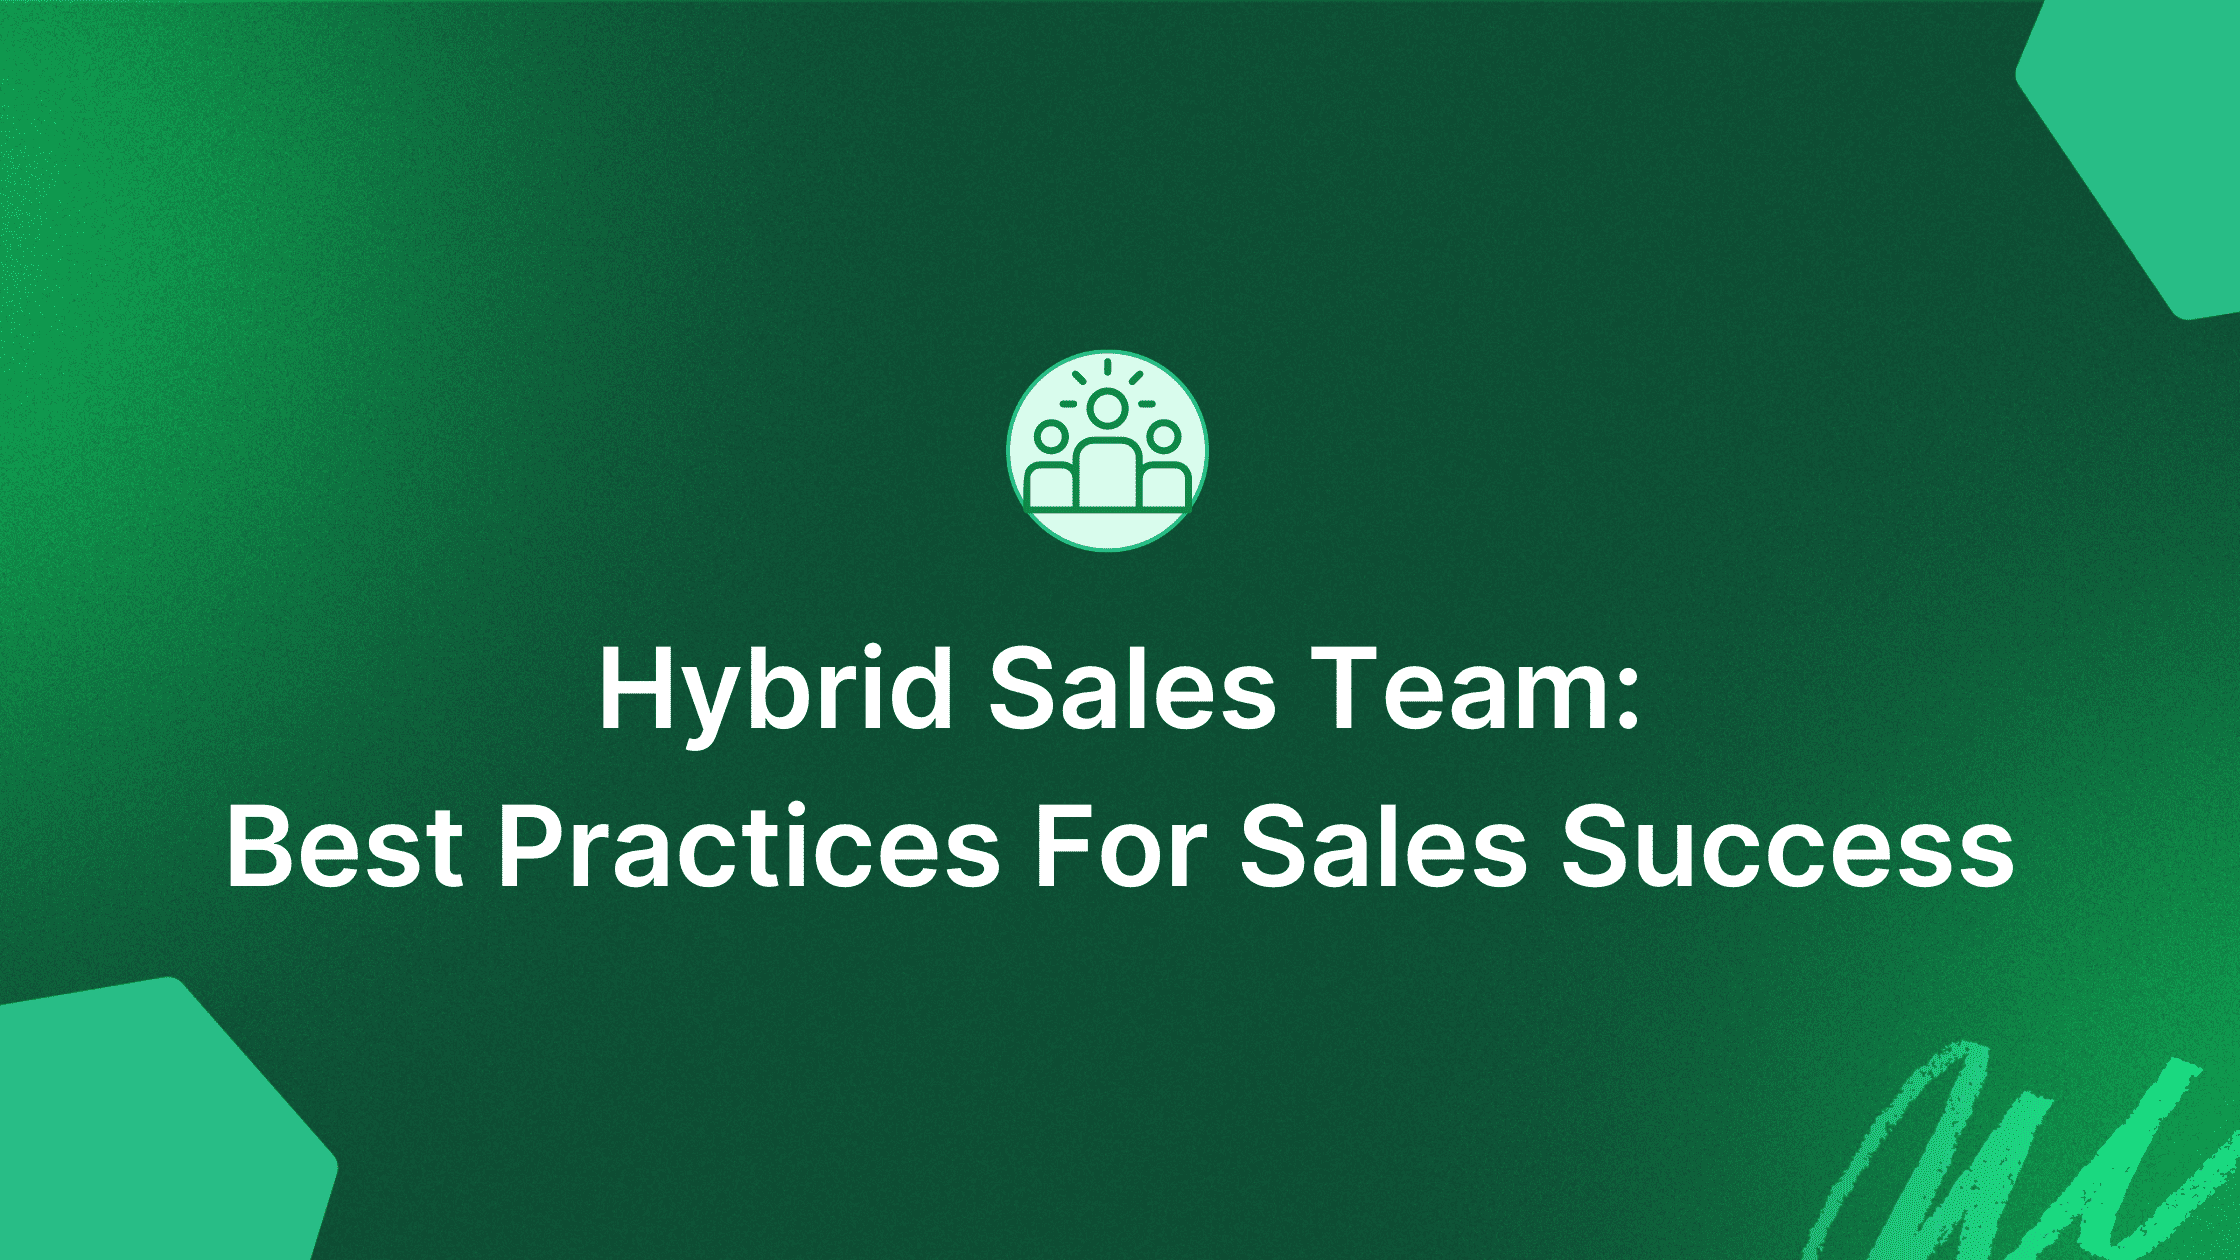 Best Practices for Sales Success in a Hybrid World